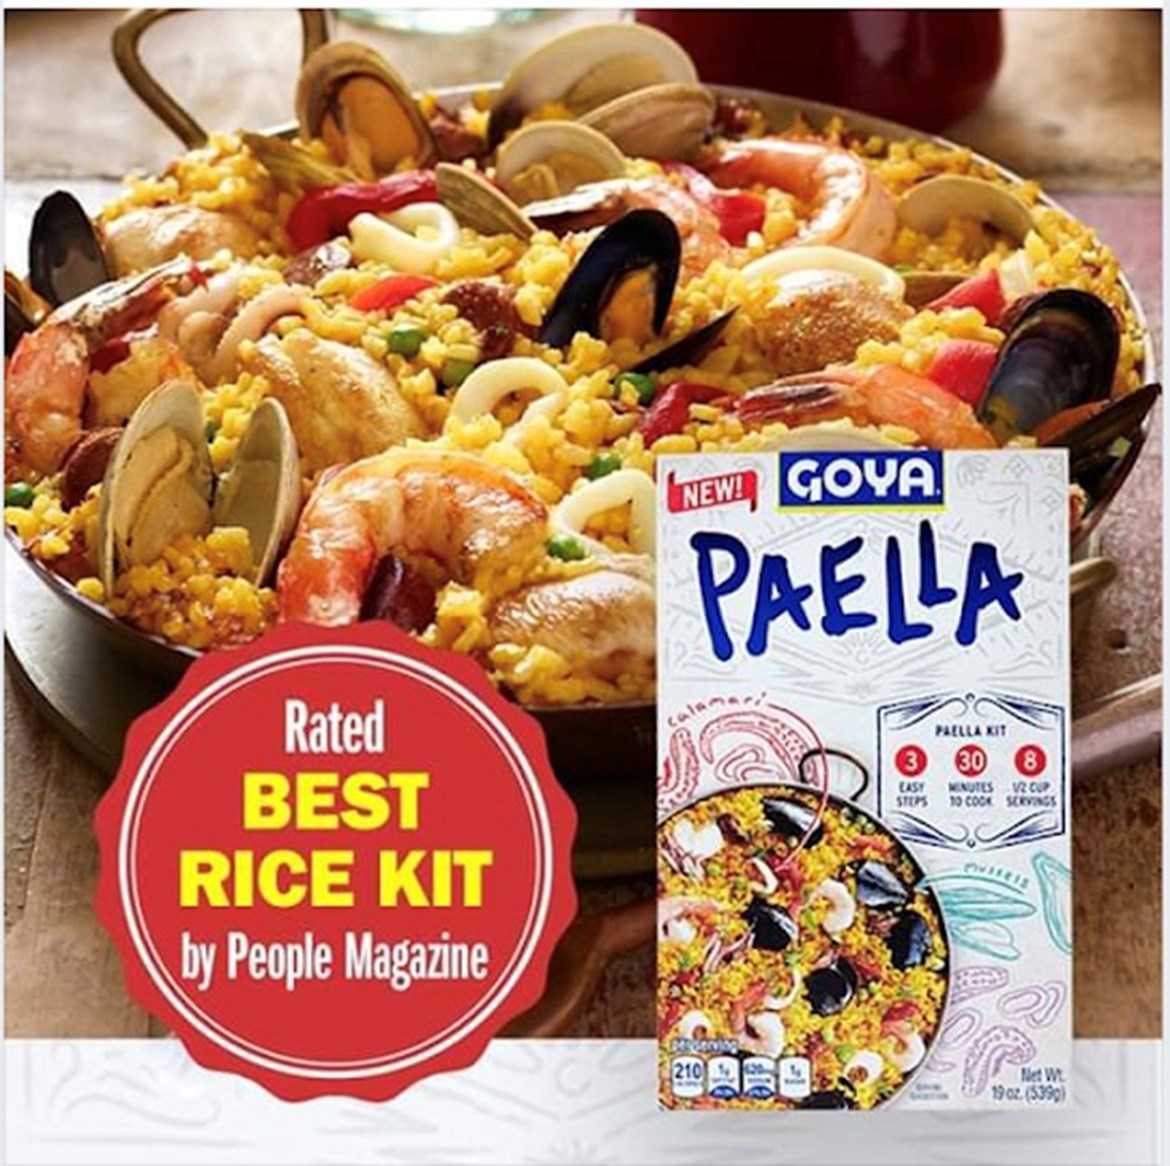 Press Release: GOYA BRINGS THE TASTES OF SPAIN TO U.S. DINNER TABLES  WITH THE LAUNCH OF ITS NEW GOYA PAELLA RICE KIT